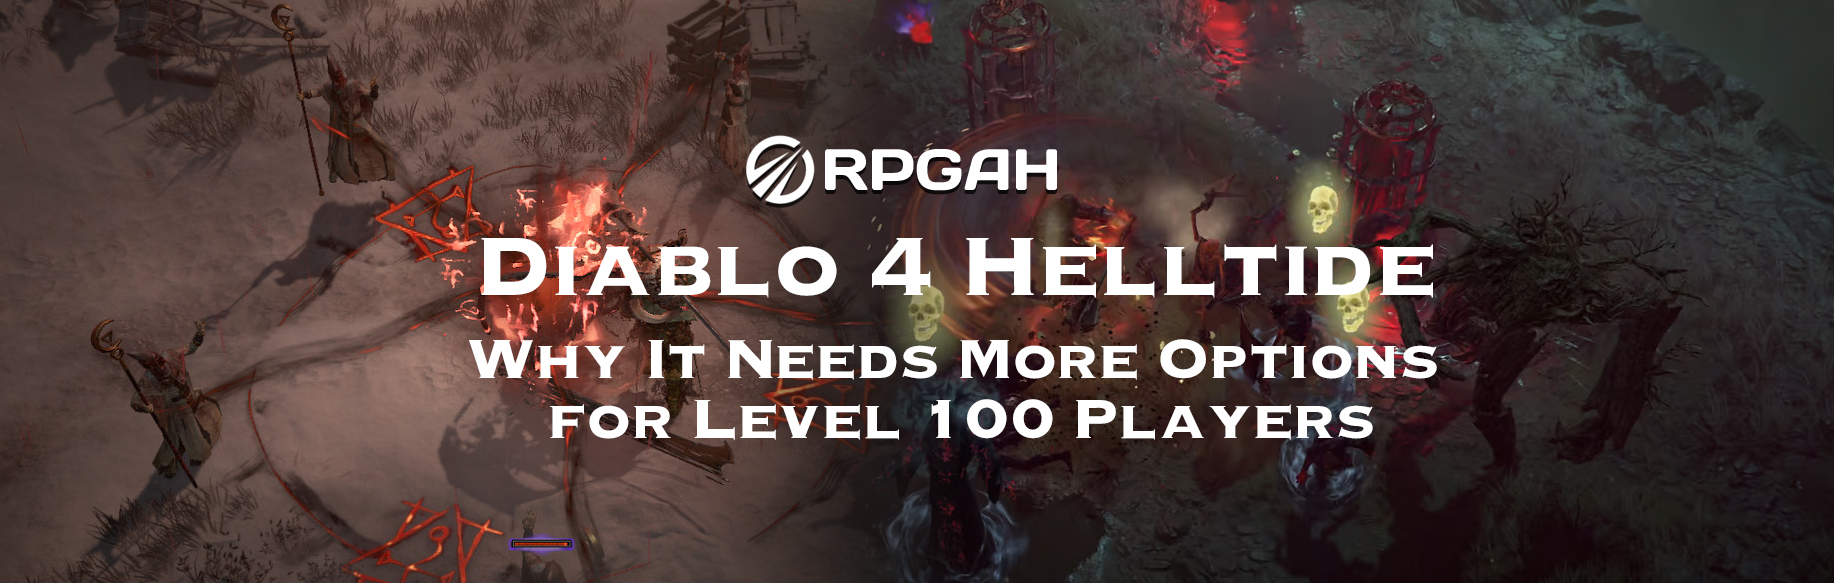 Diablo 4 Helltide: Why It Needs More Options for Level 100 Players